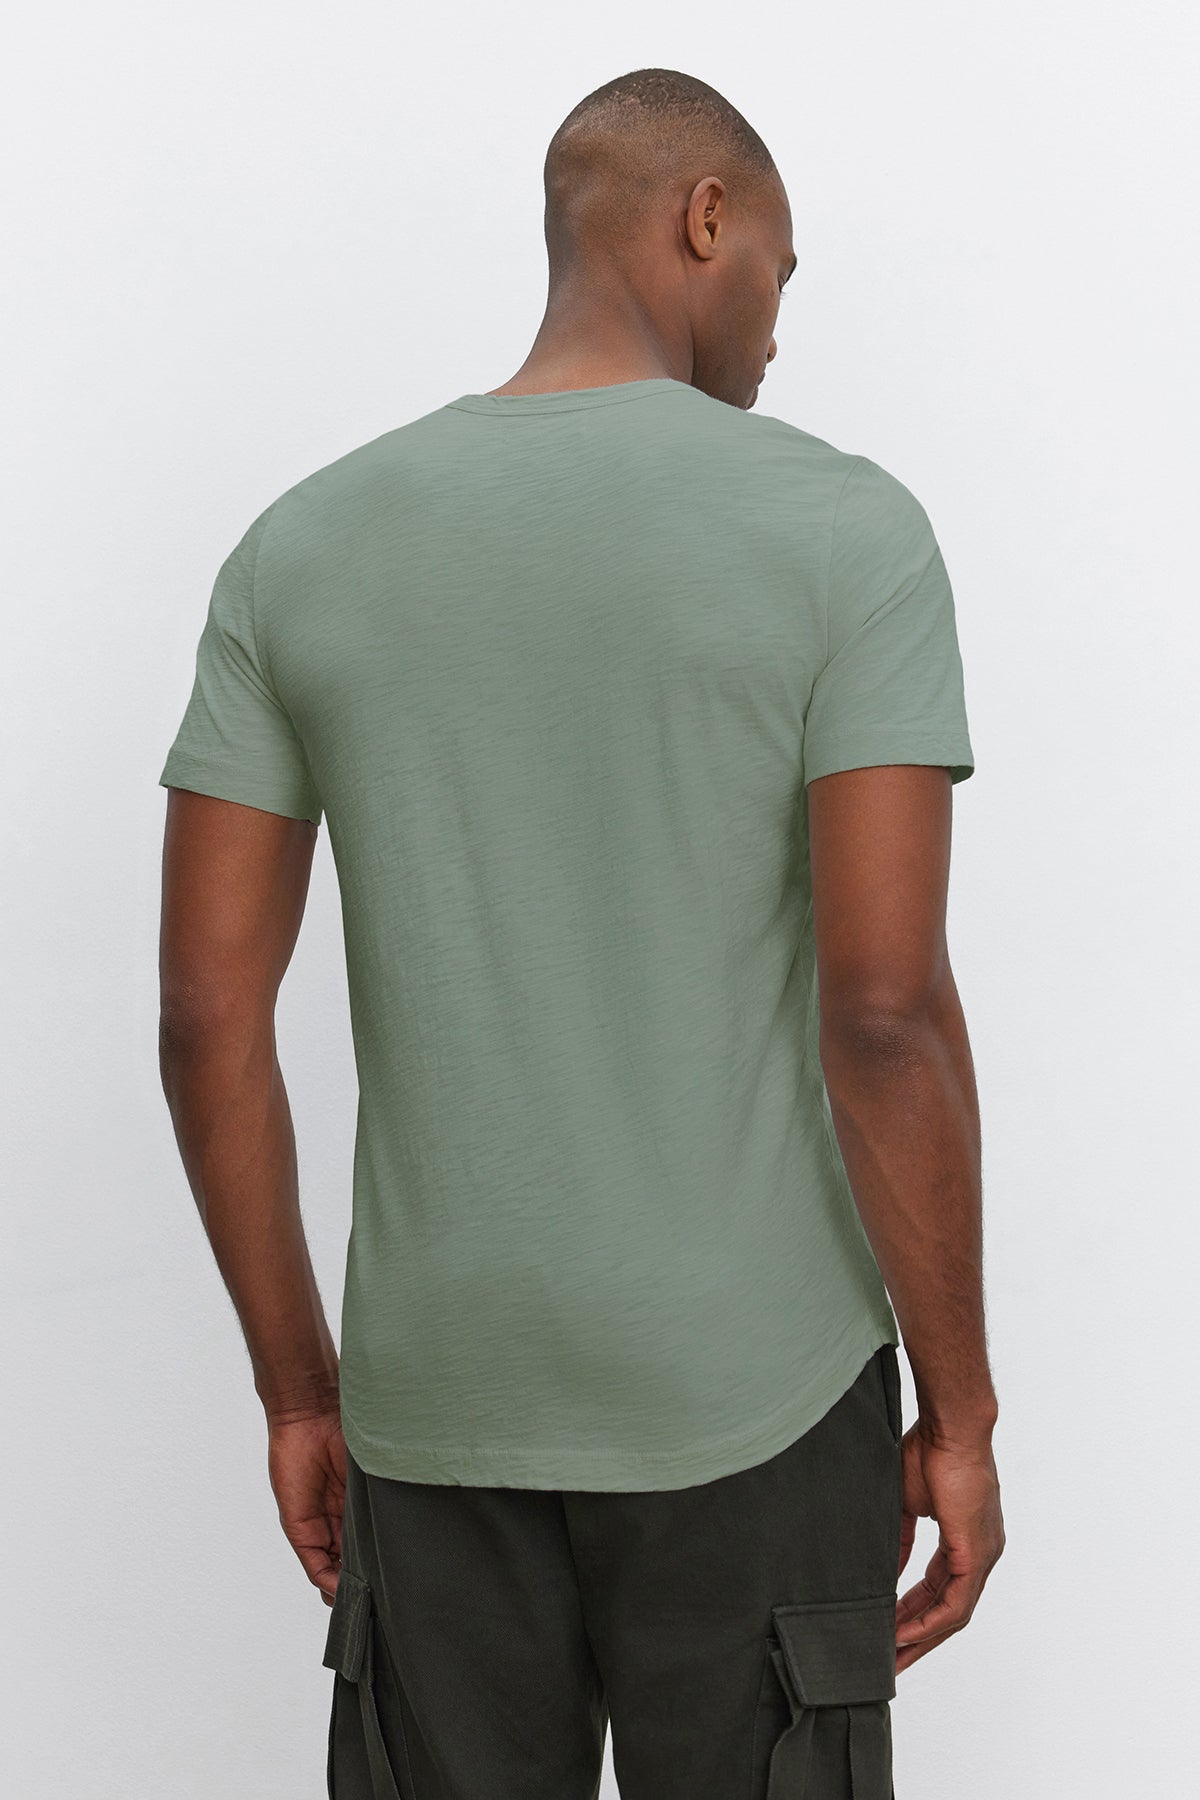 A man is standing with his back facing the camera, wearing a stylish light green Velvet by Graham & Spencer AMARO TEE and dark cargo pants.-36909384728769